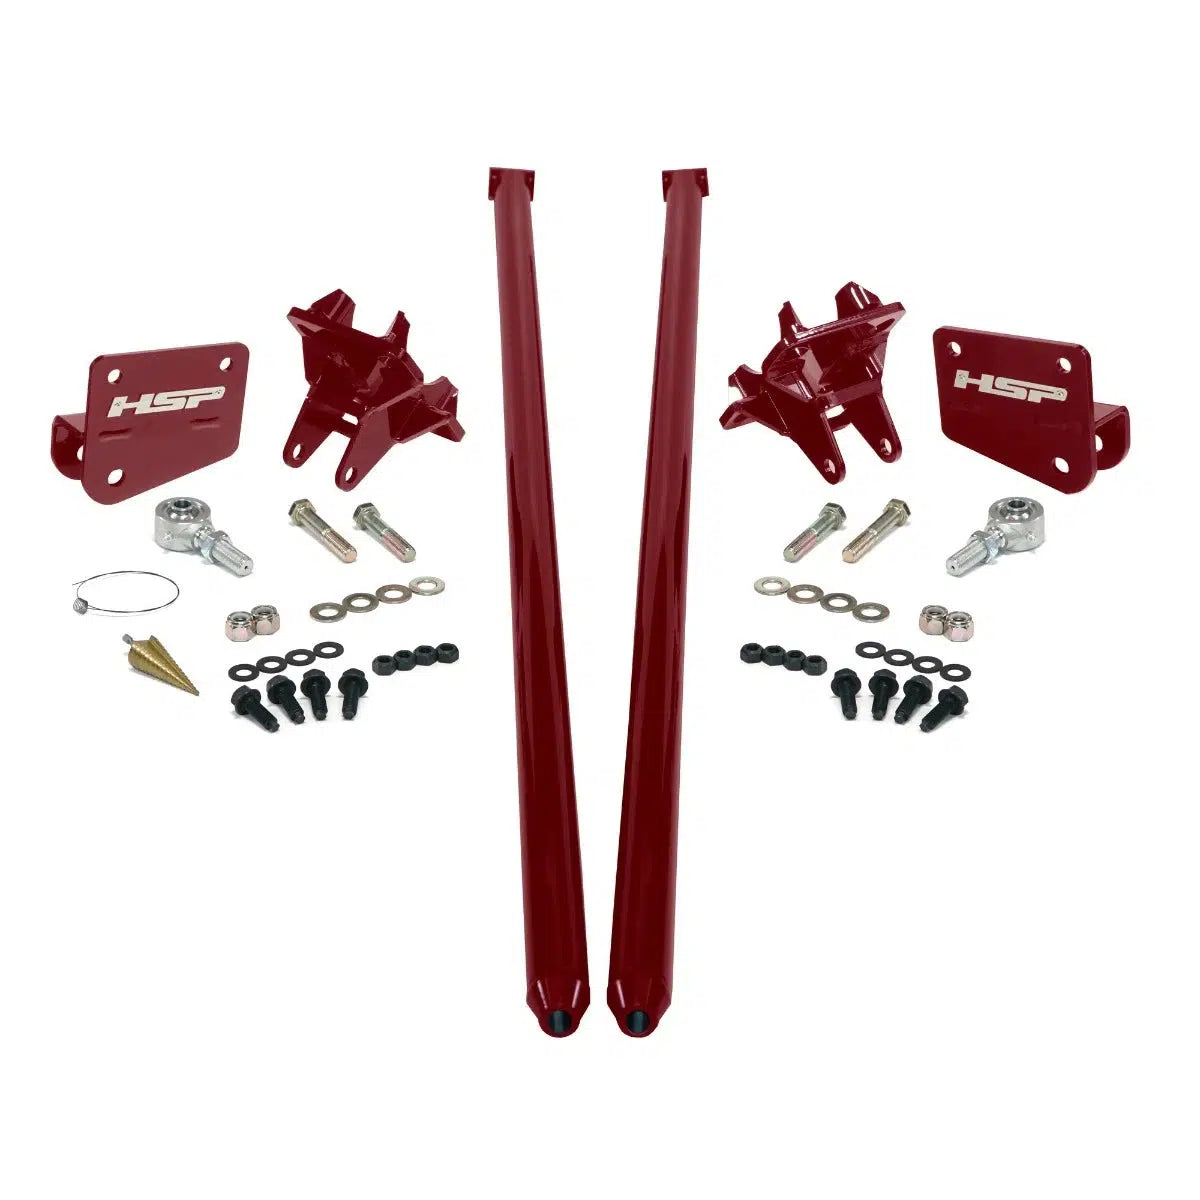 2011-2017 Powerstroke Traction Bars (ECLB,CCSB) (HSP-P-435-2-3-HSP)-Traction Bars-HSP Diesel-HSP-P-435-2-3-HSP-CR-Dirty Diesel Customs